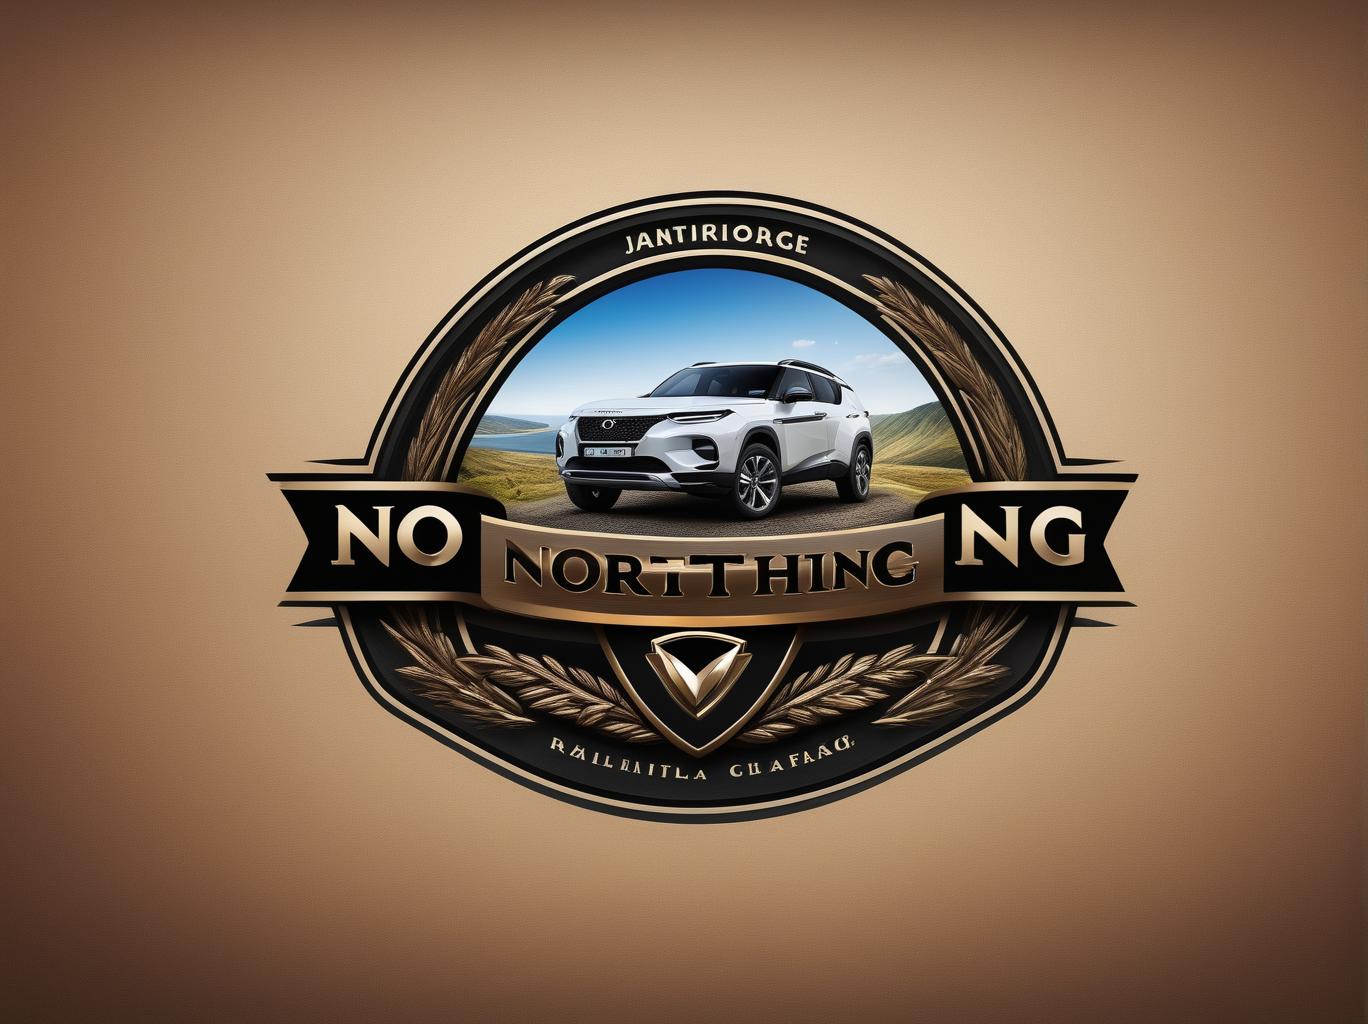  Logo, (realism style), create an image with northing and vehicle tracking